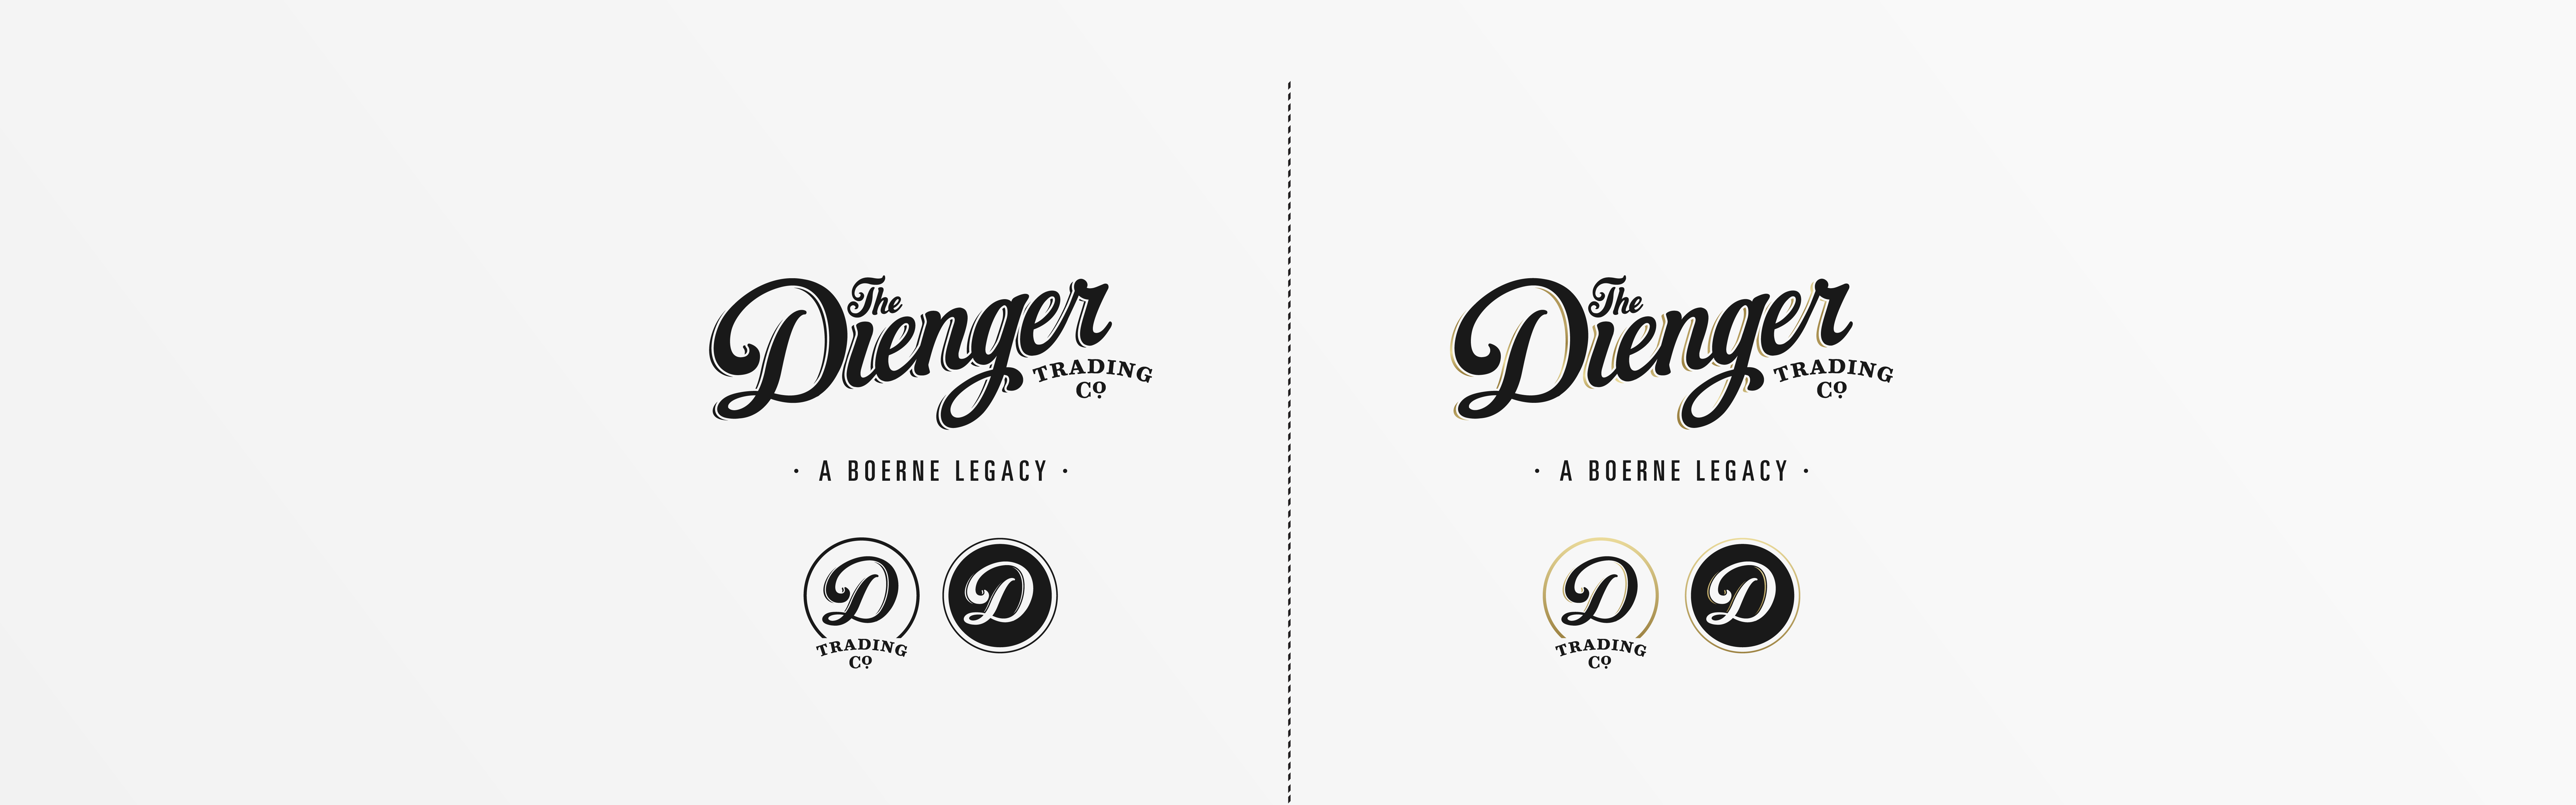 A black and white image showcasing two variations of a logo design concept for "The Dienger Trading Co.," featuring stylized text and monogram elements, with both versions accompanied by the tagline 